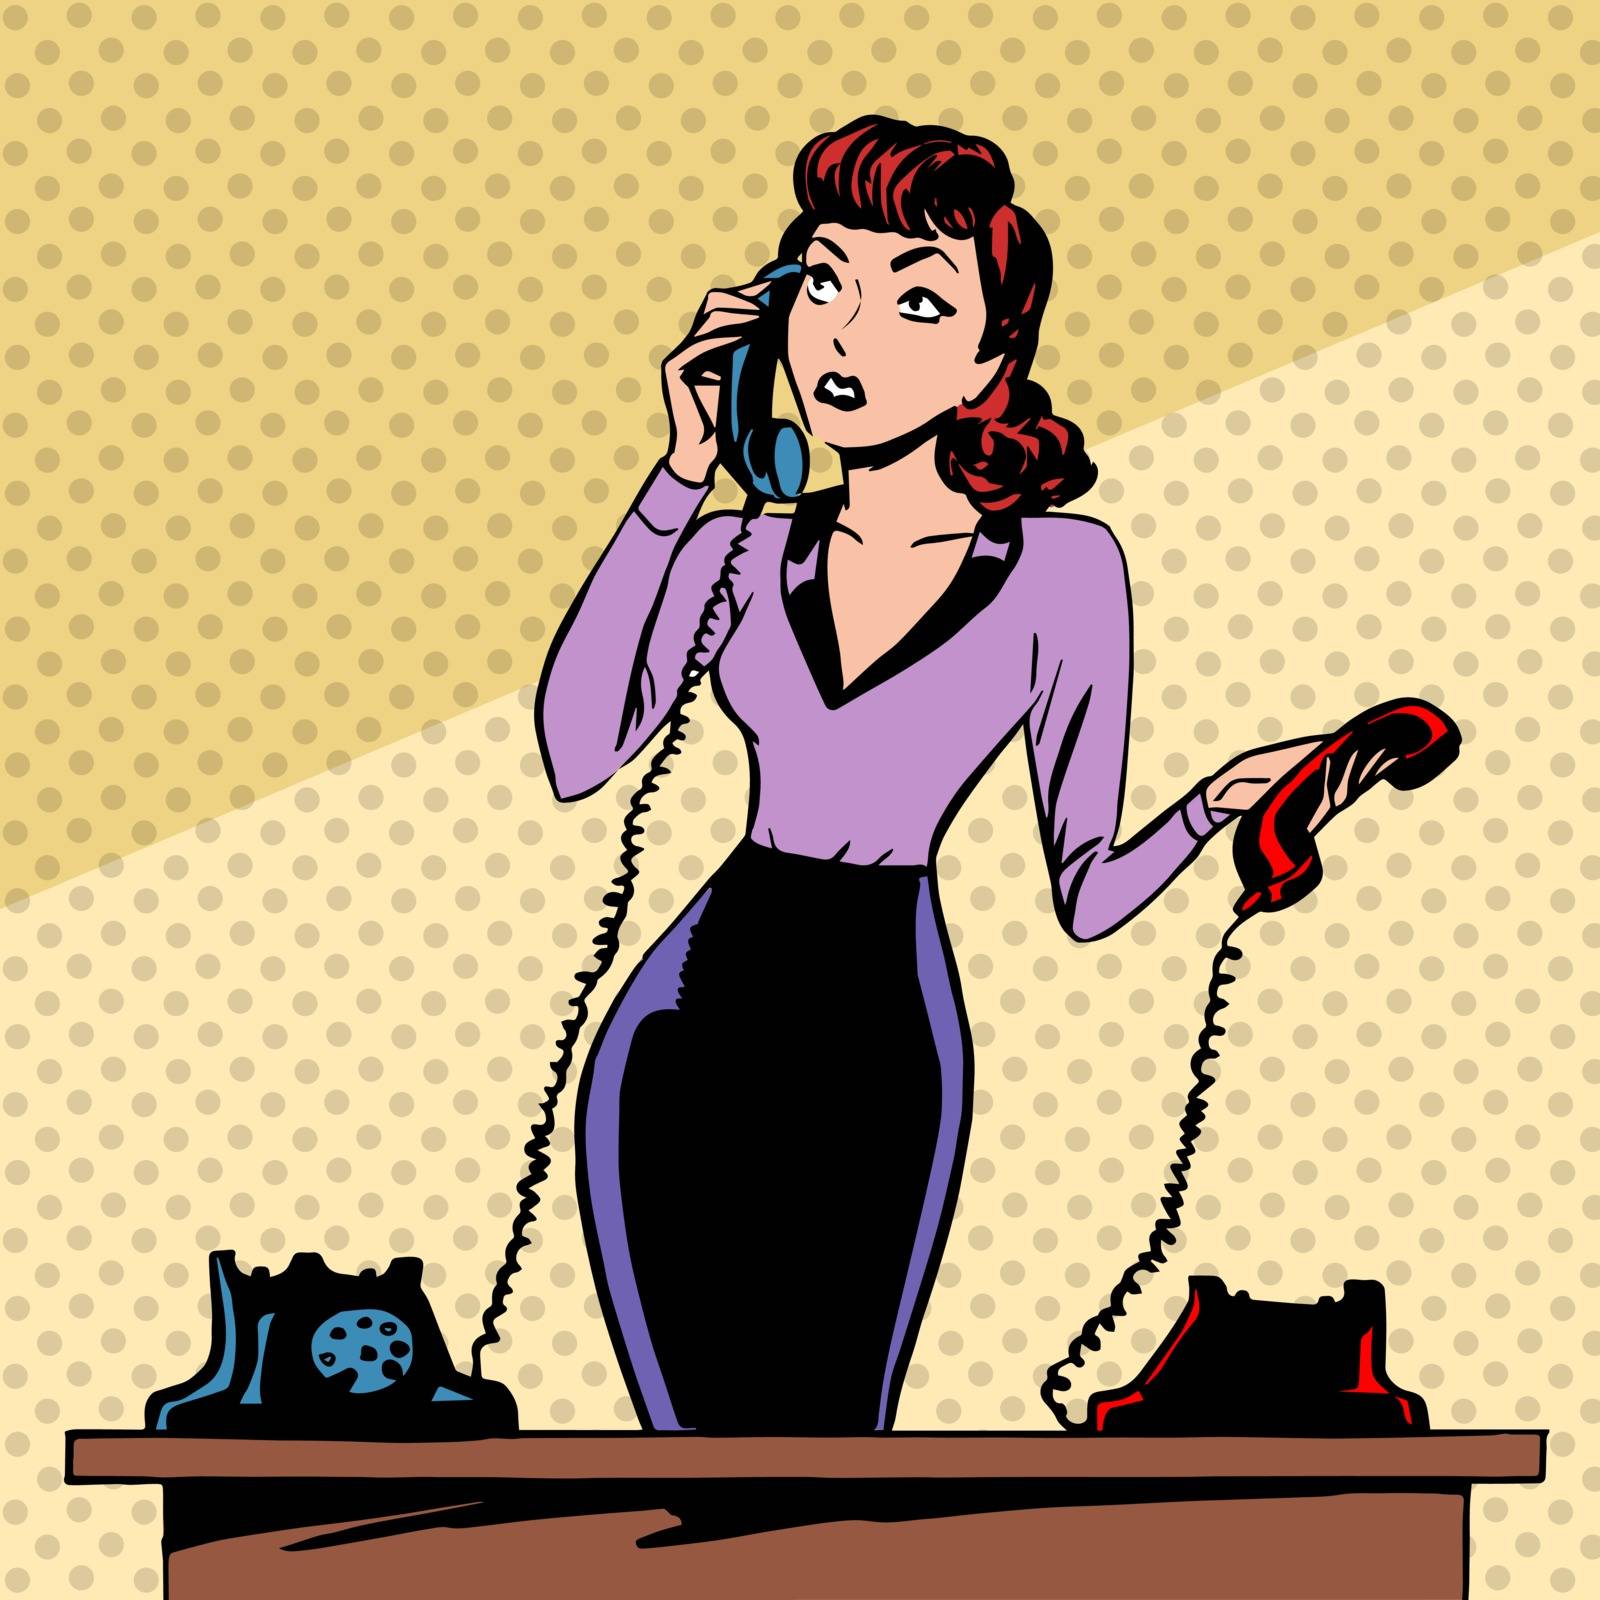 Girl Secretary answers the phone progress and communication technology pop art comics retro style Halftone. Imitation of old illustrations. The old woman lifts the handset and communicates with them